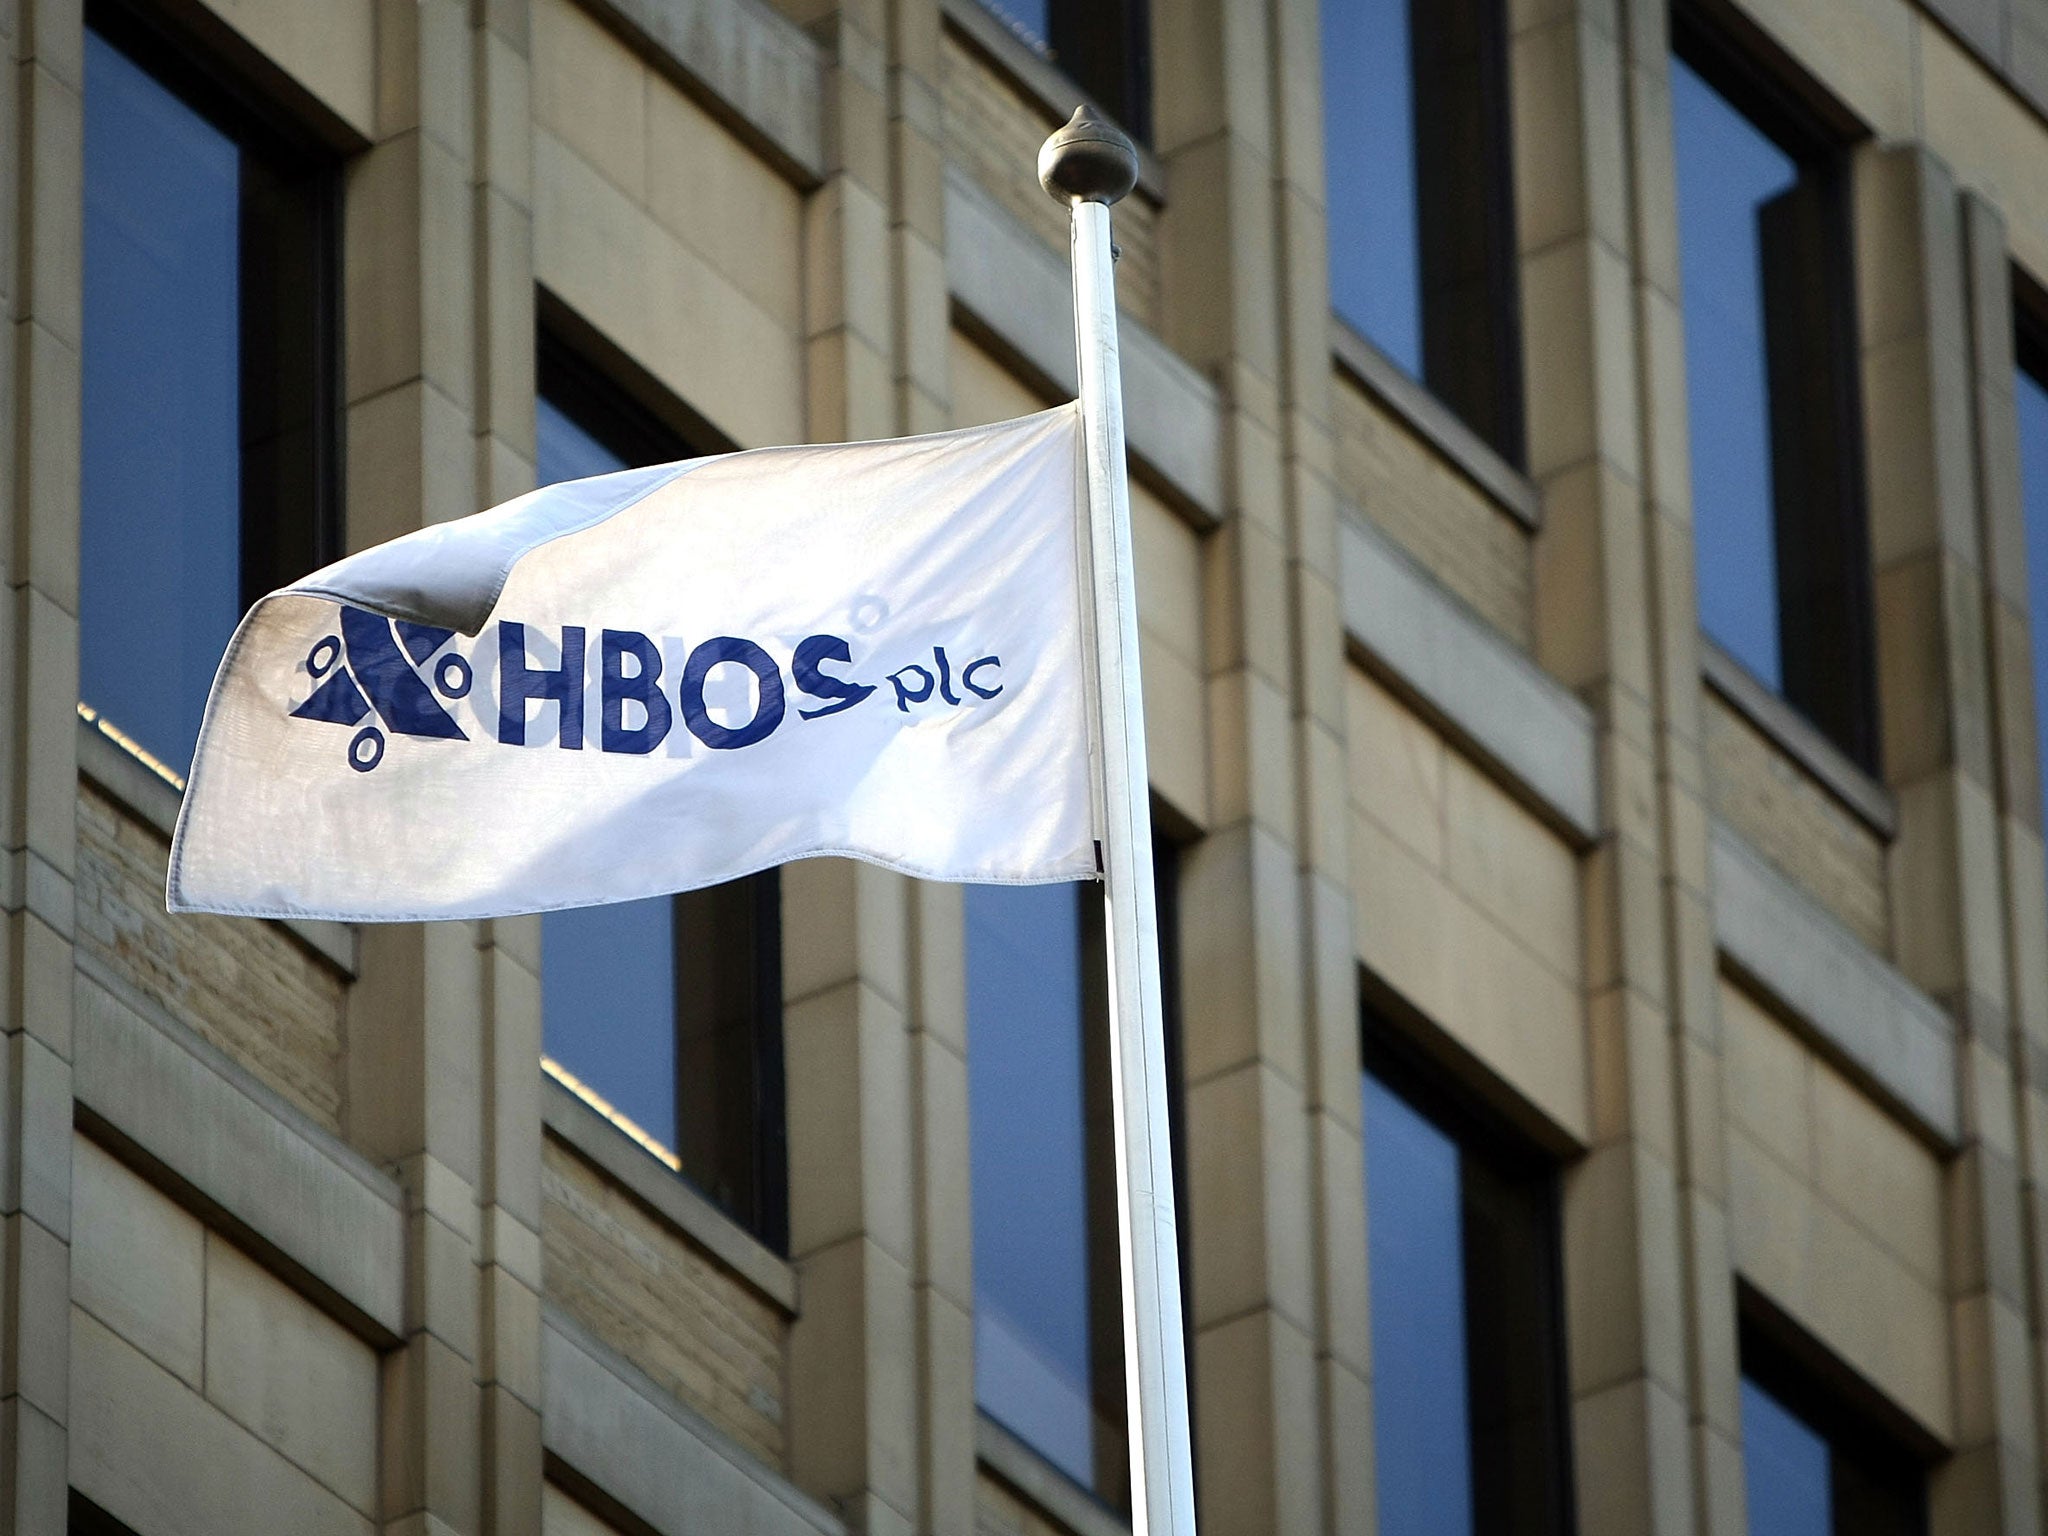 HBOS was told it had 'less than' a 1 in 100,000 chance of failing those imposed by the then regulator just three years before its near-collapse